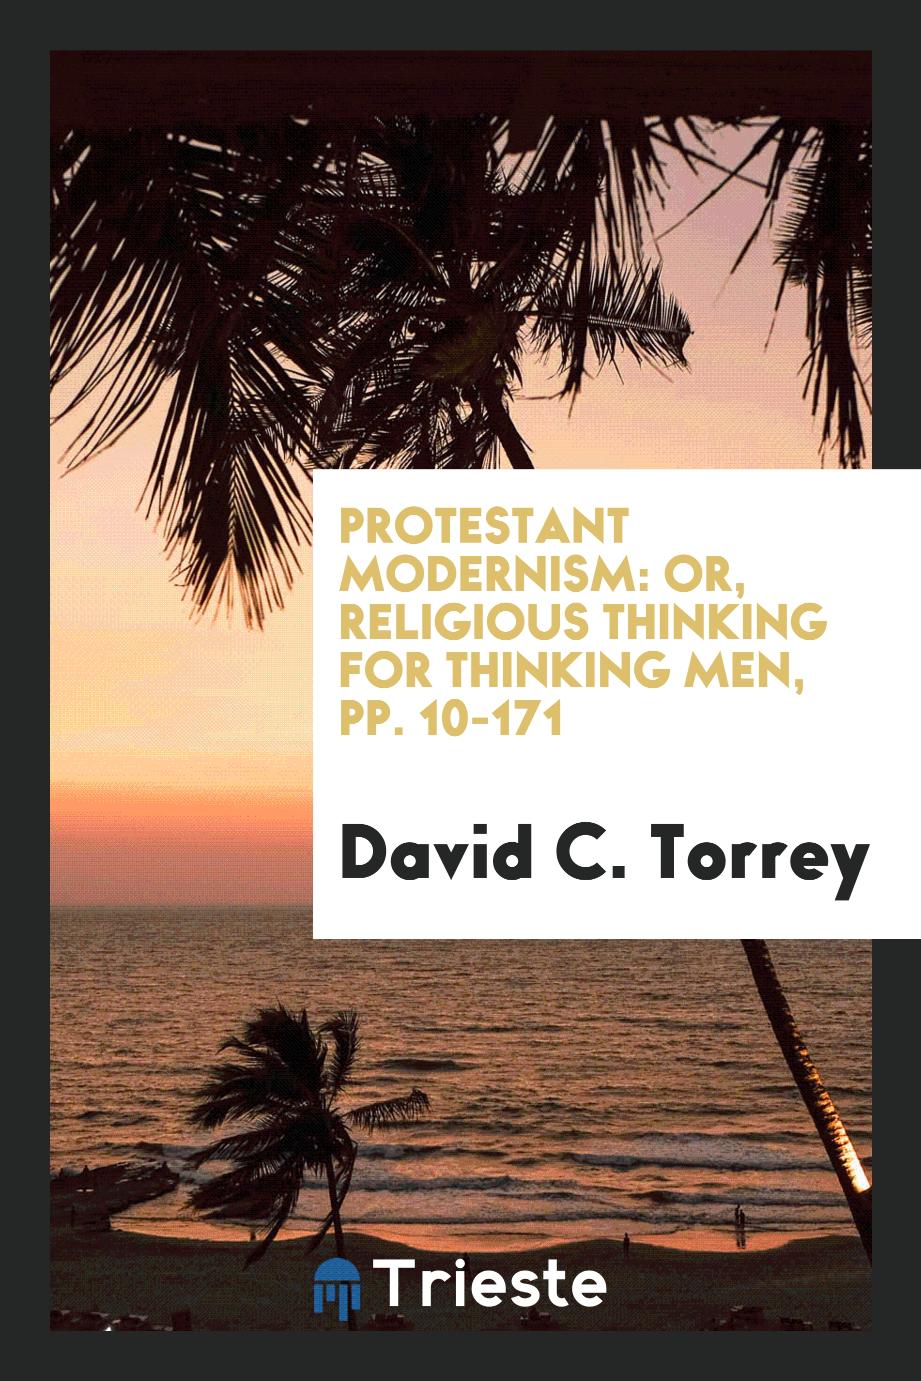 Protestant Modernism: Or, Religious Thinking for Thinking Men, pp. 10-171